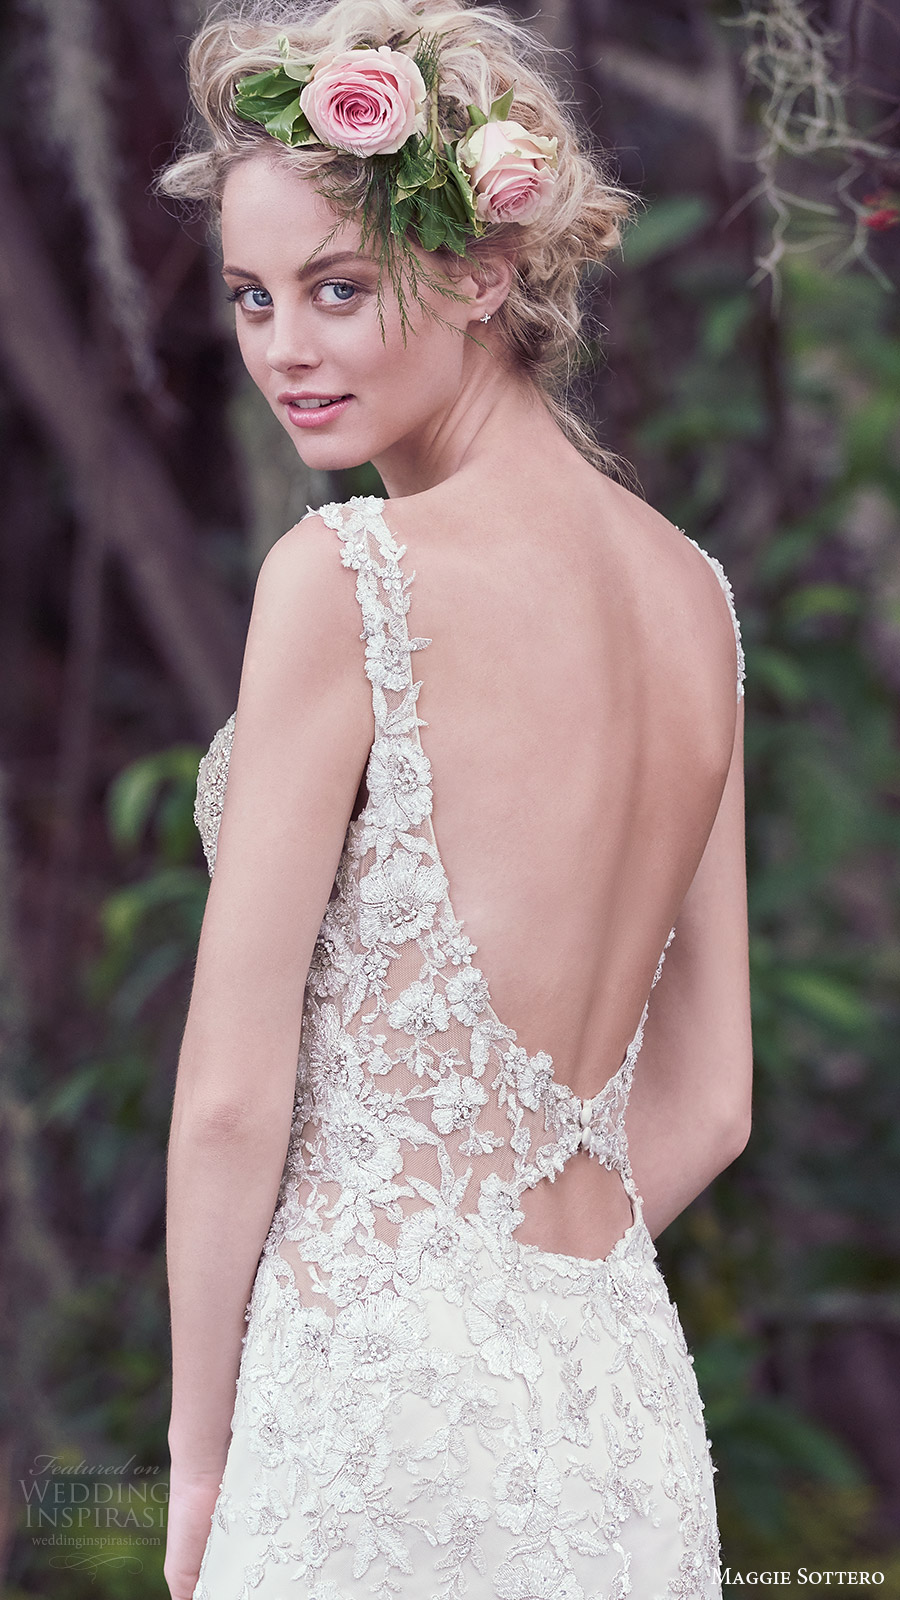 Maggie Sottero Fall 2016 Wedding Dresses — “Lisette” Bridal Collection ...